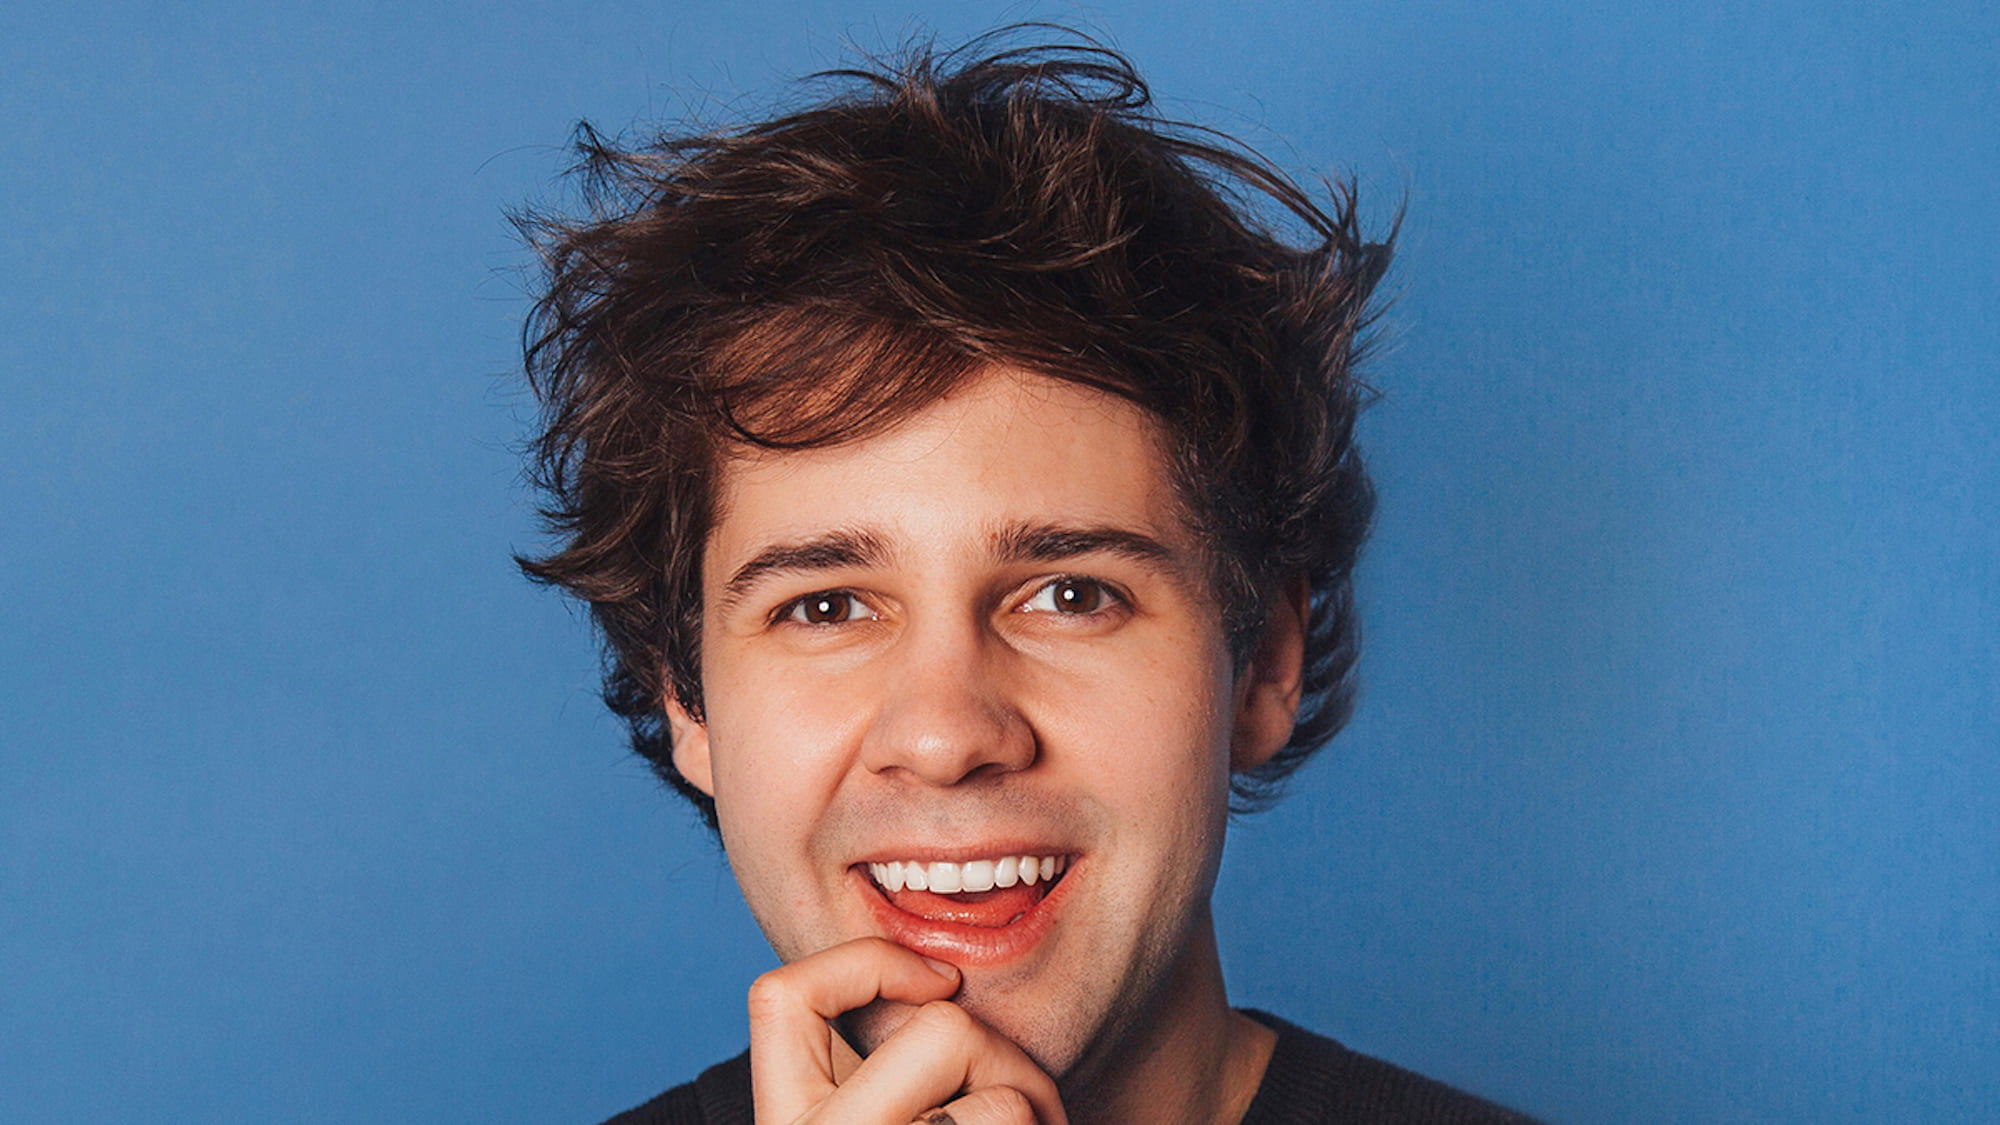 Who is David Dobrik? The worst things he’s done for fame